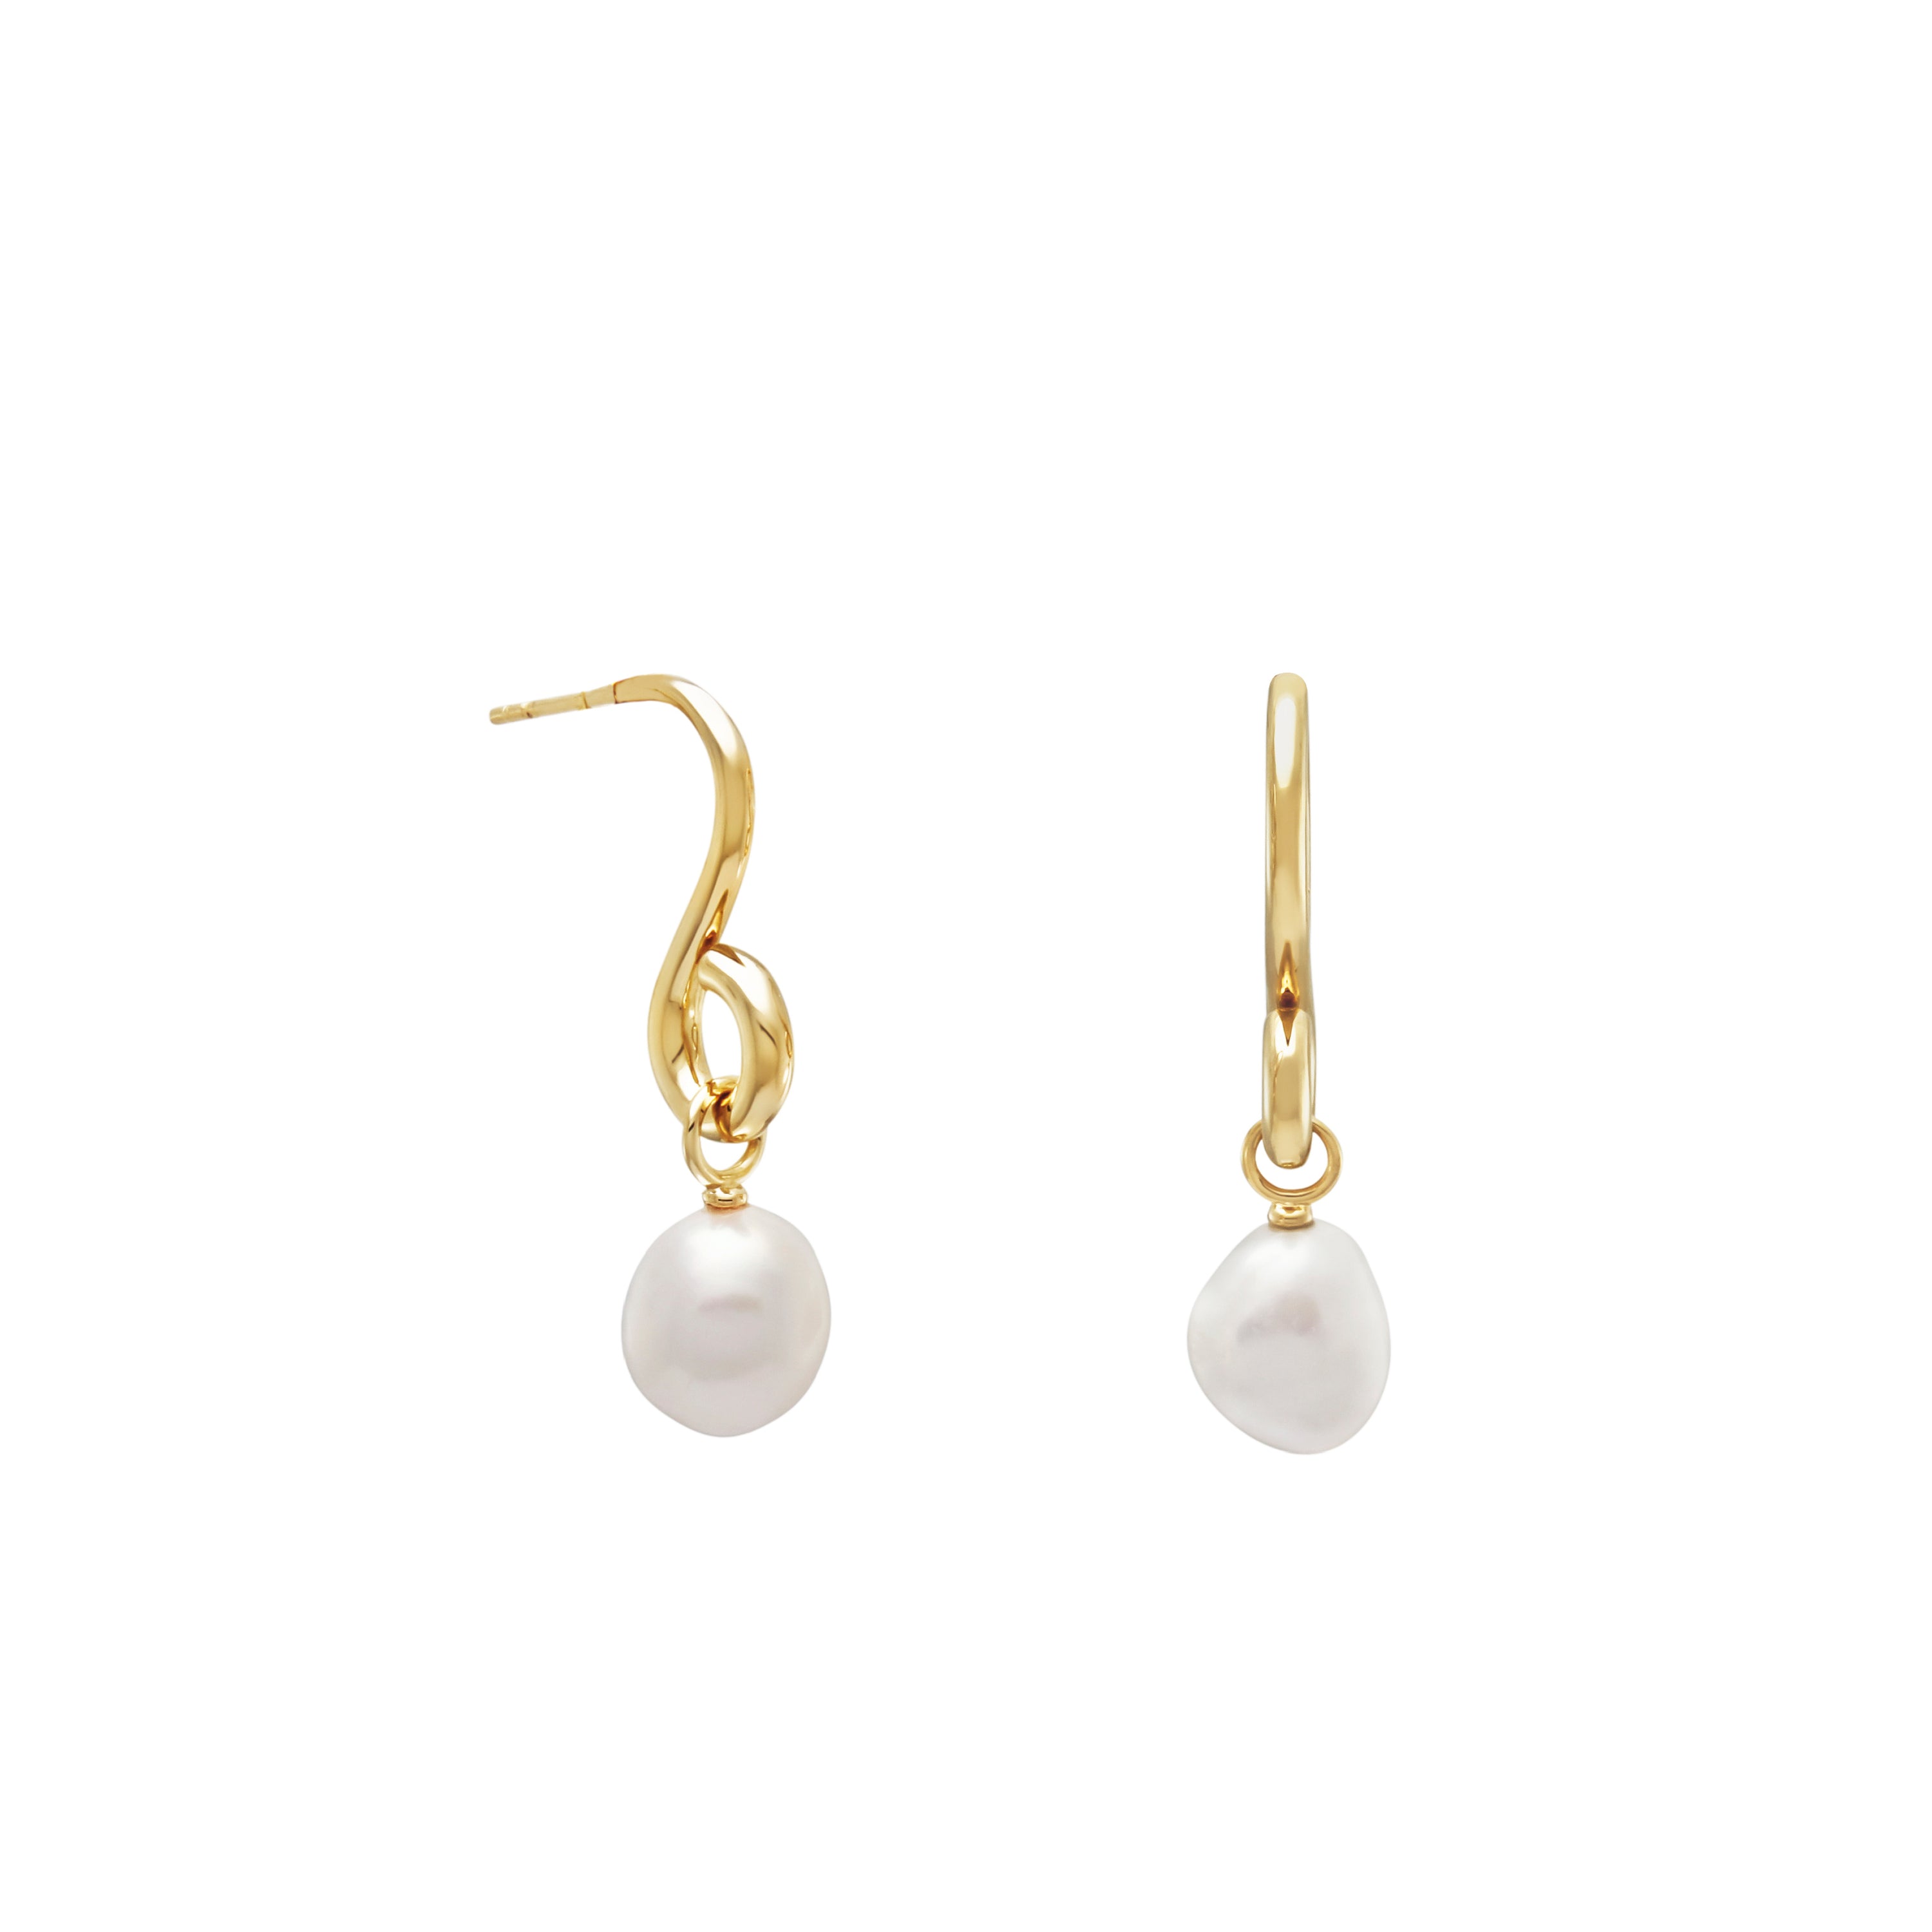 Oura Pearl Stud Earring. Gold Vermeil